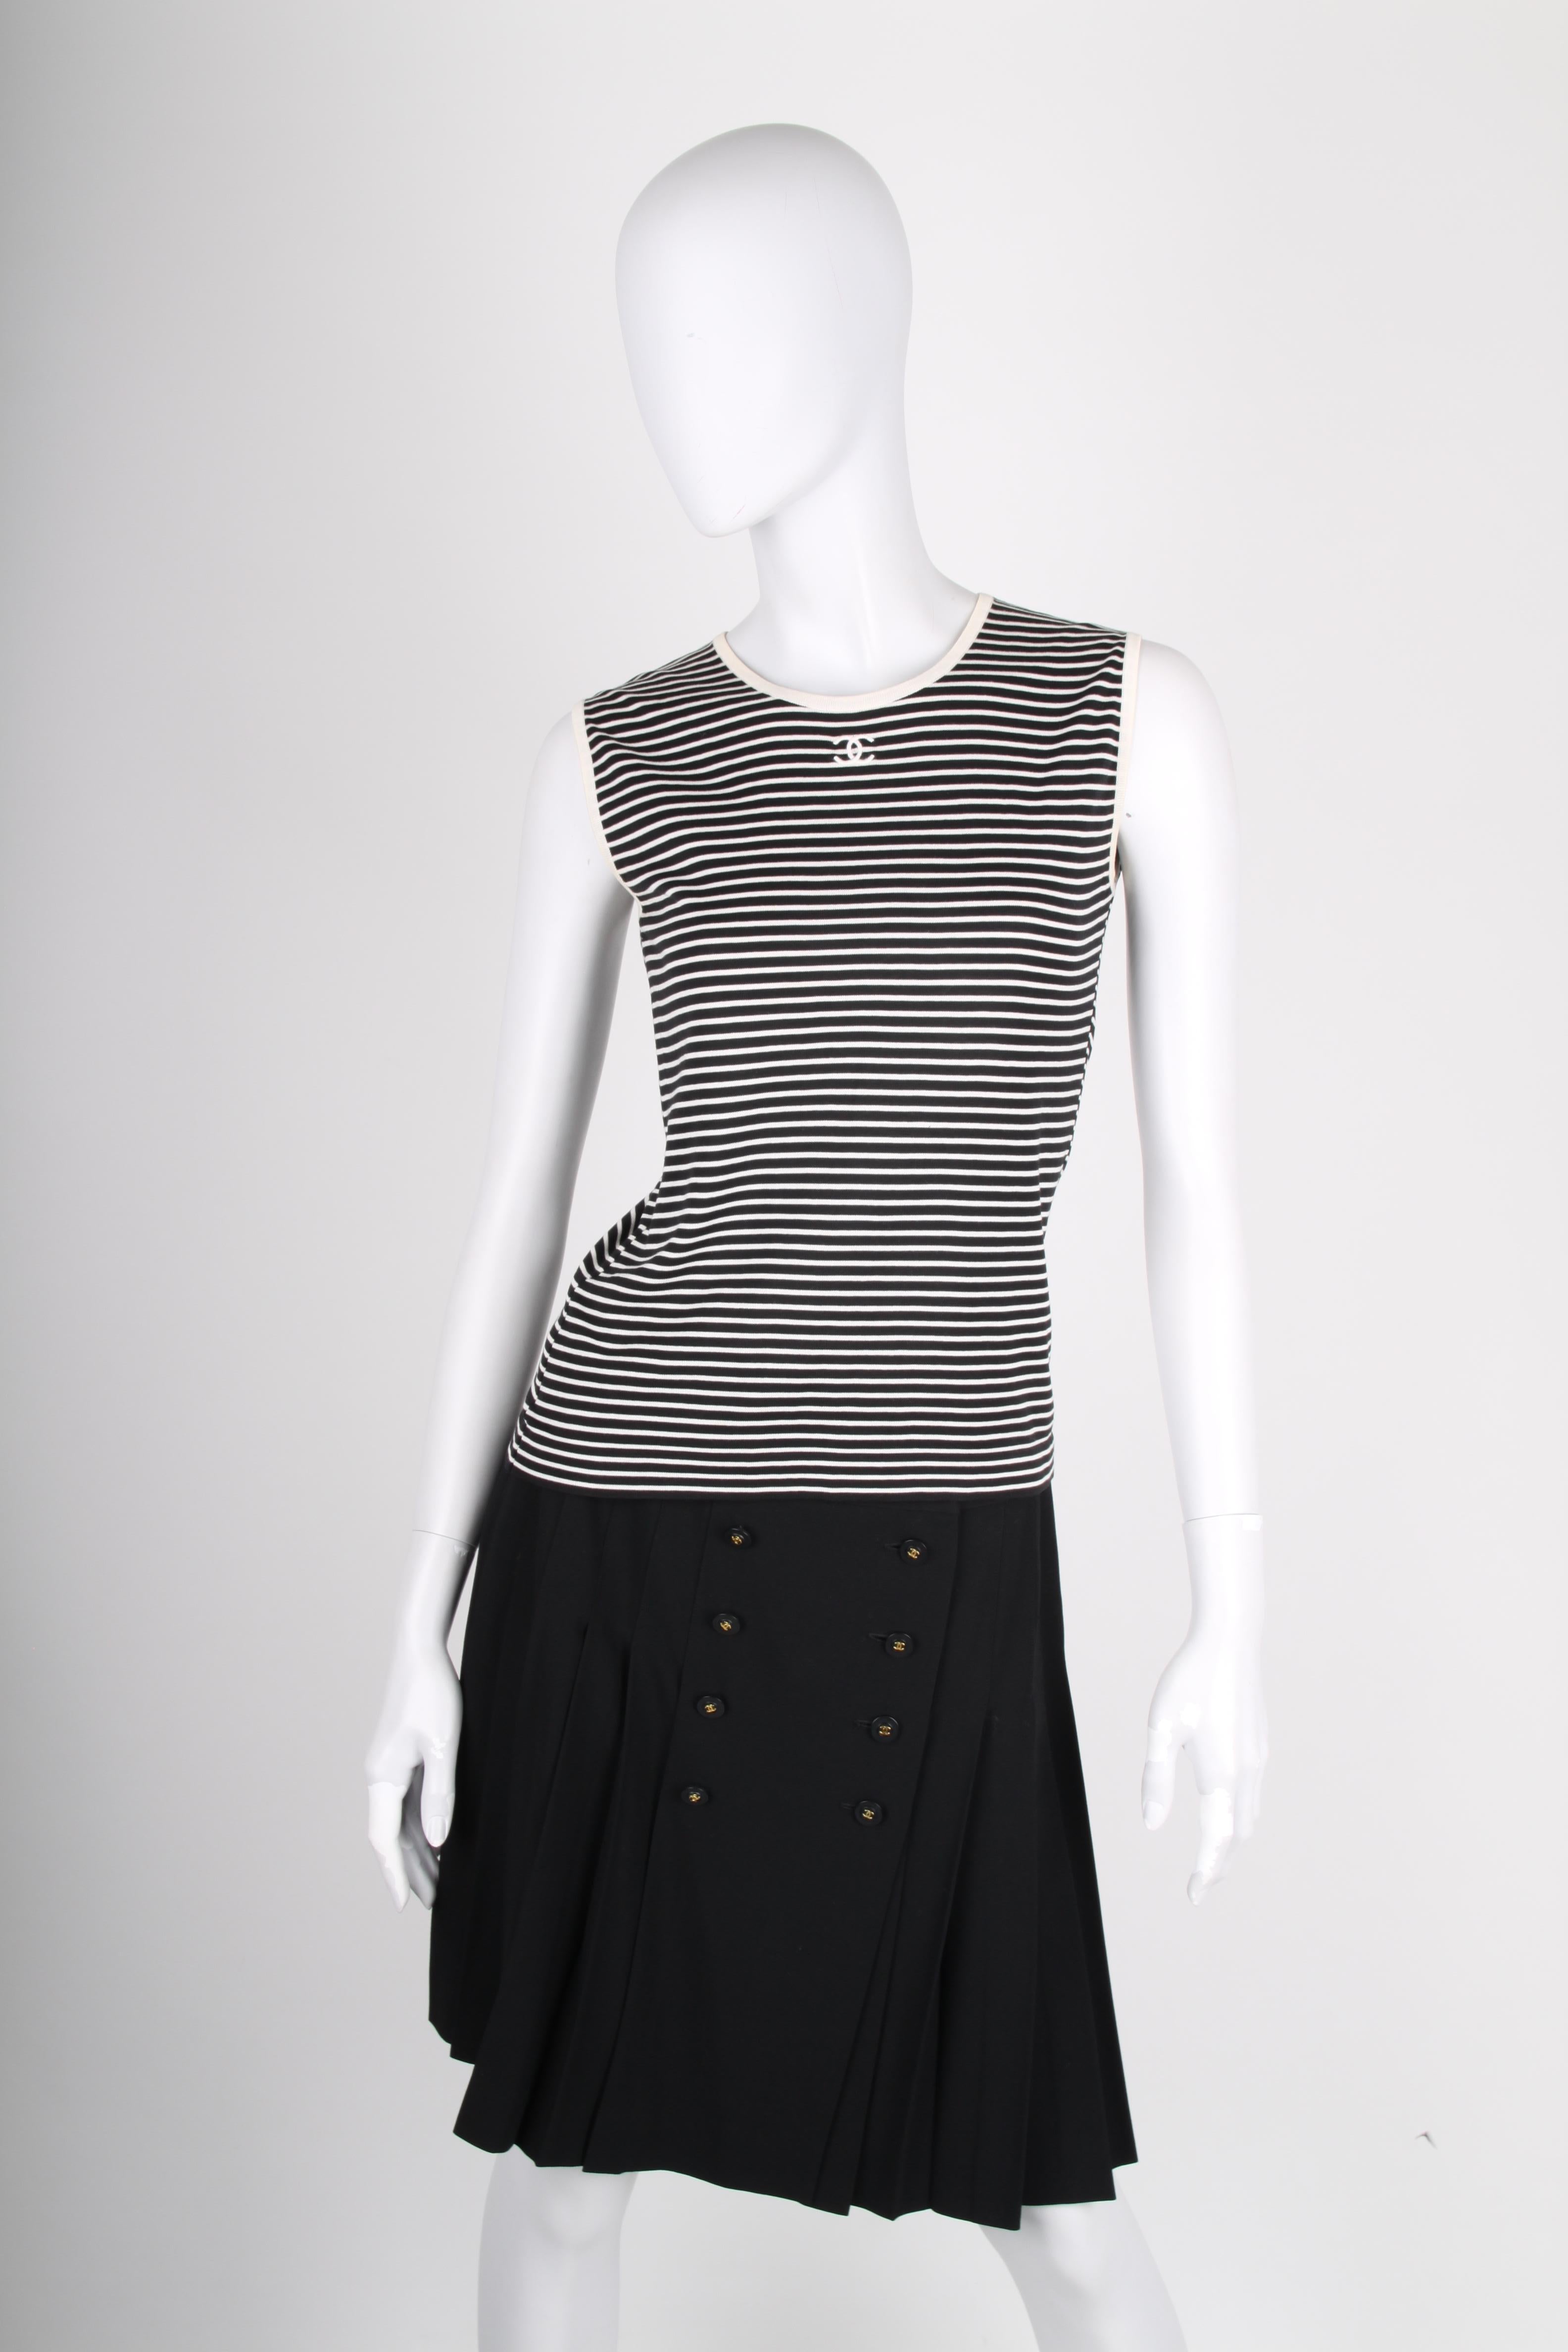 Classic black & white striped top by Chanel. Nice!

Sleeveless with a round neckline. Just below the neckline a white embroidered CC logo is applied. Stretching material, comfortable to wear.

In very good condition, 9,5/10. The size- and material